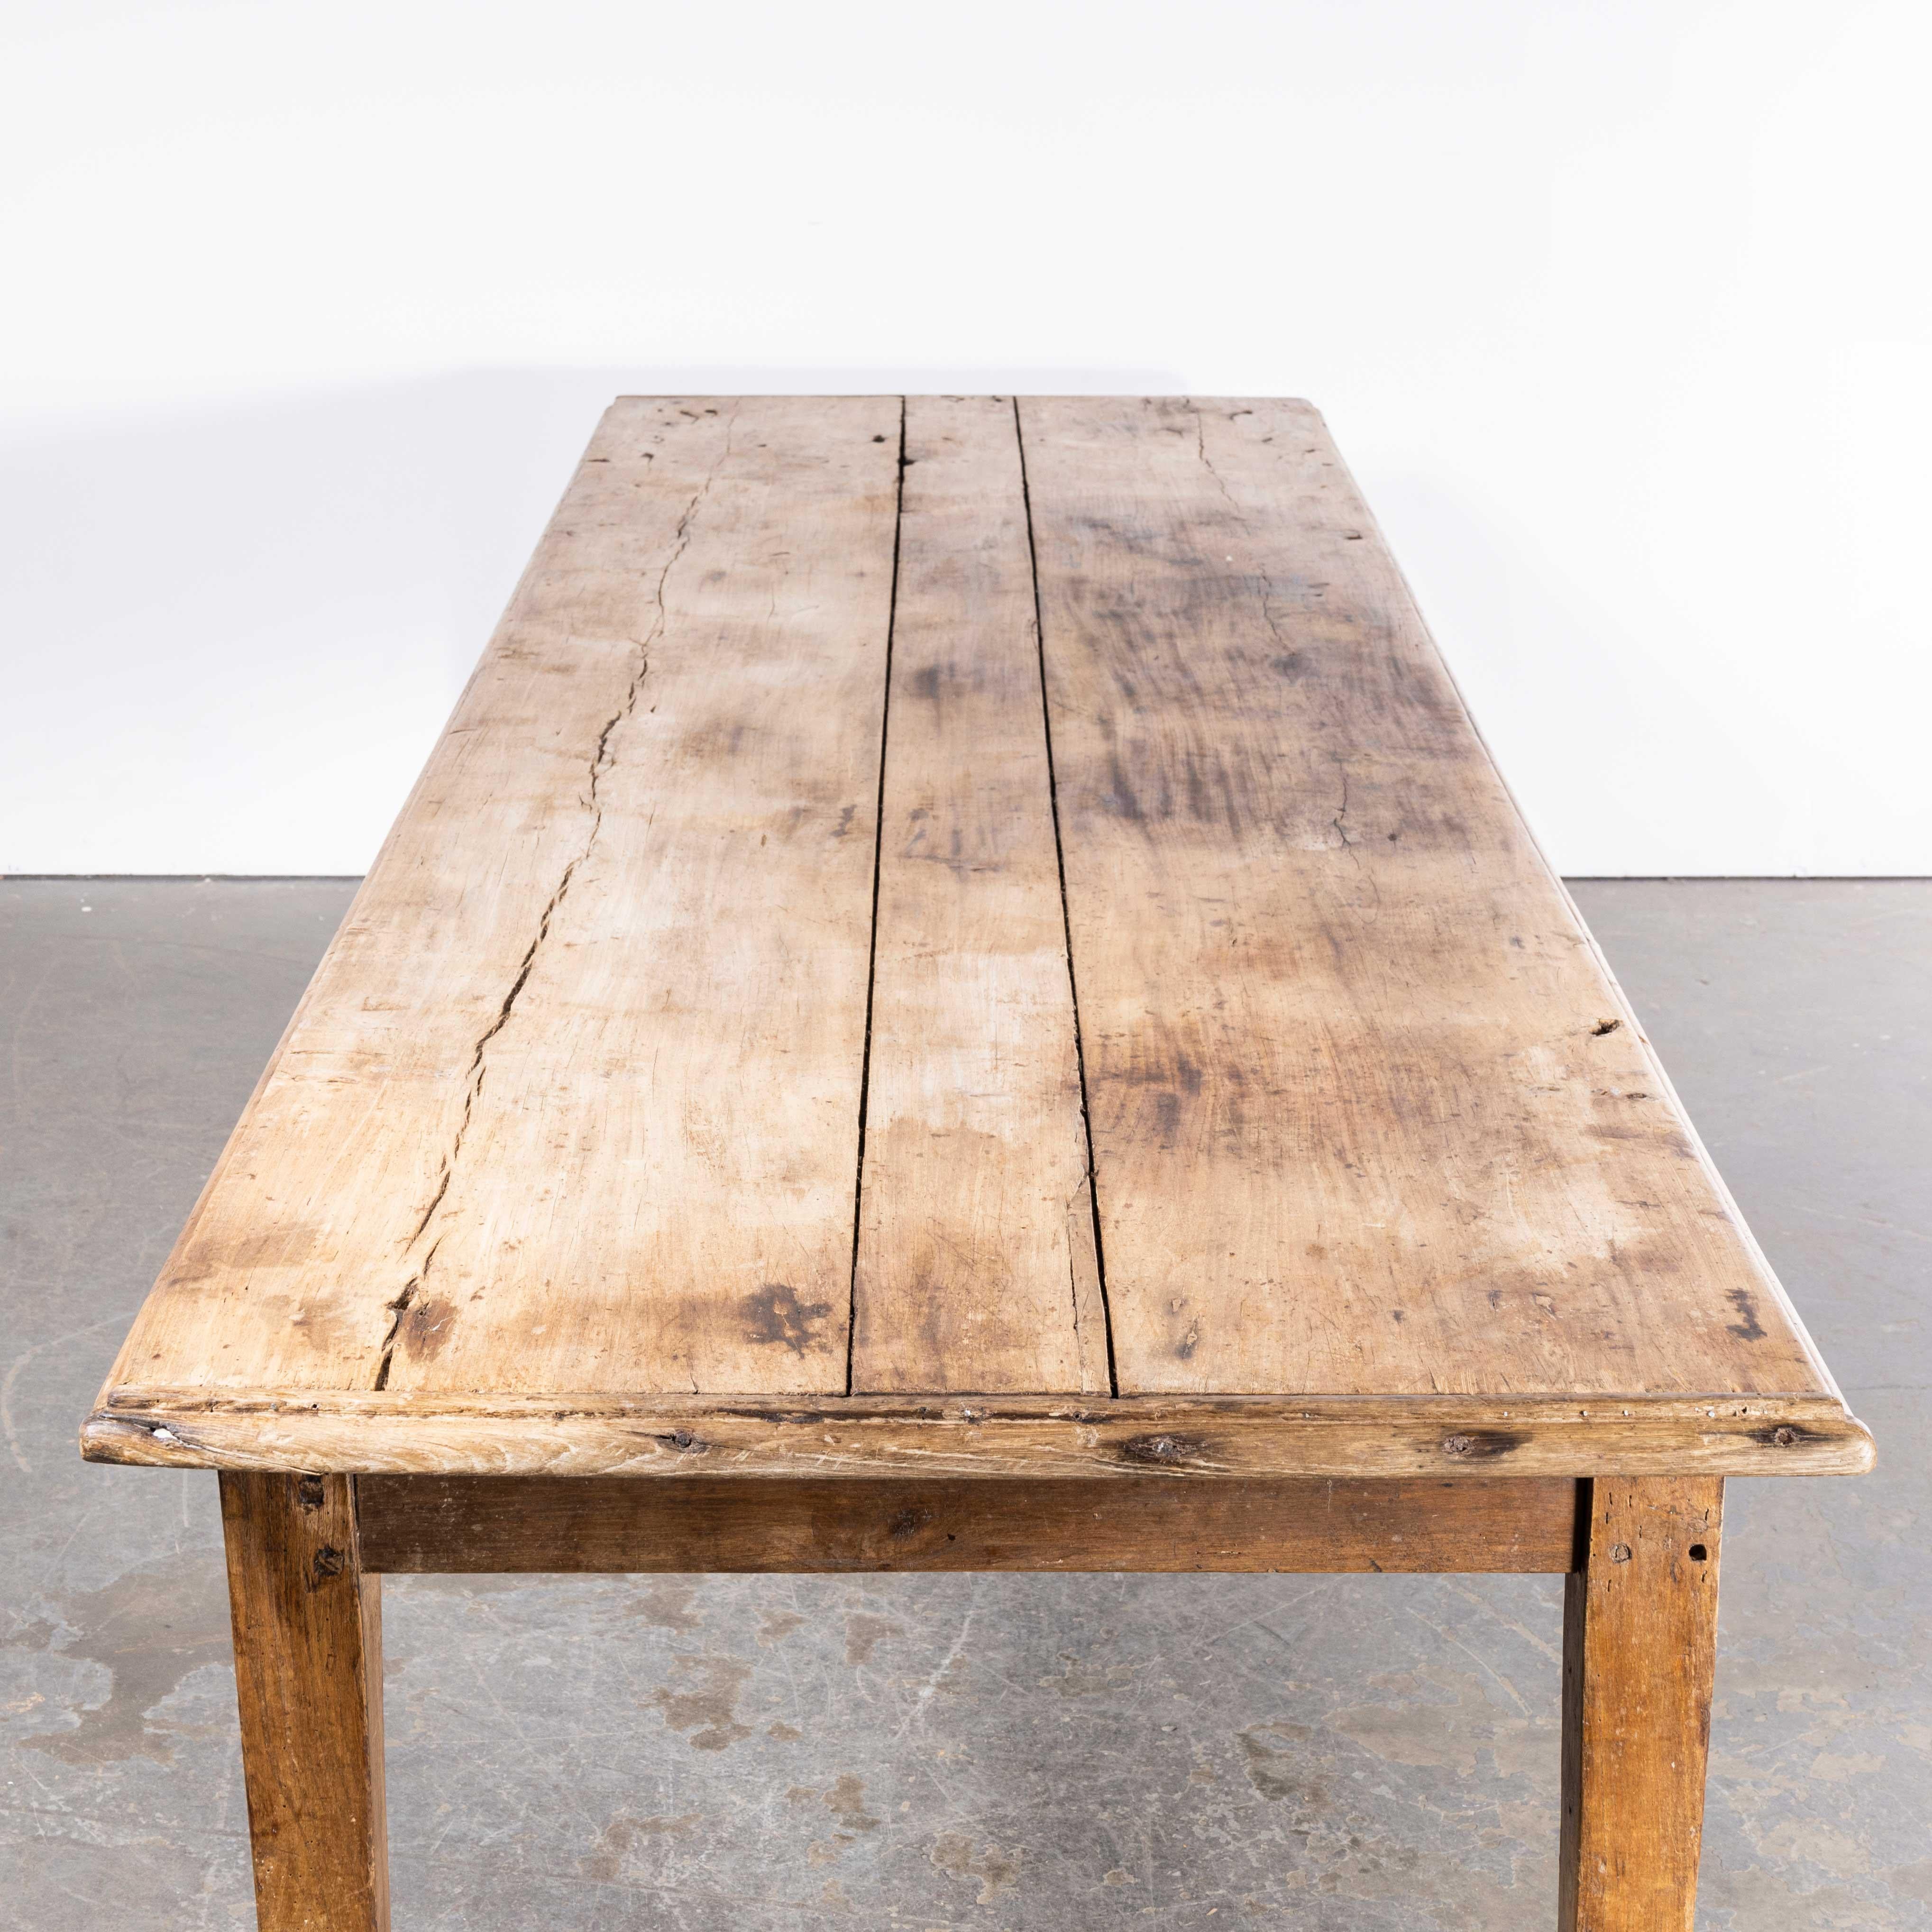 1920’s French Wild Oak Rectangular Farmhouse Dining Table – Three Plank
1920’s French Wild Oak Rectangular Farmhouse Dining Table – Three Plank. Good original French classic farmhouse table made from solid oak throughout. The table is original